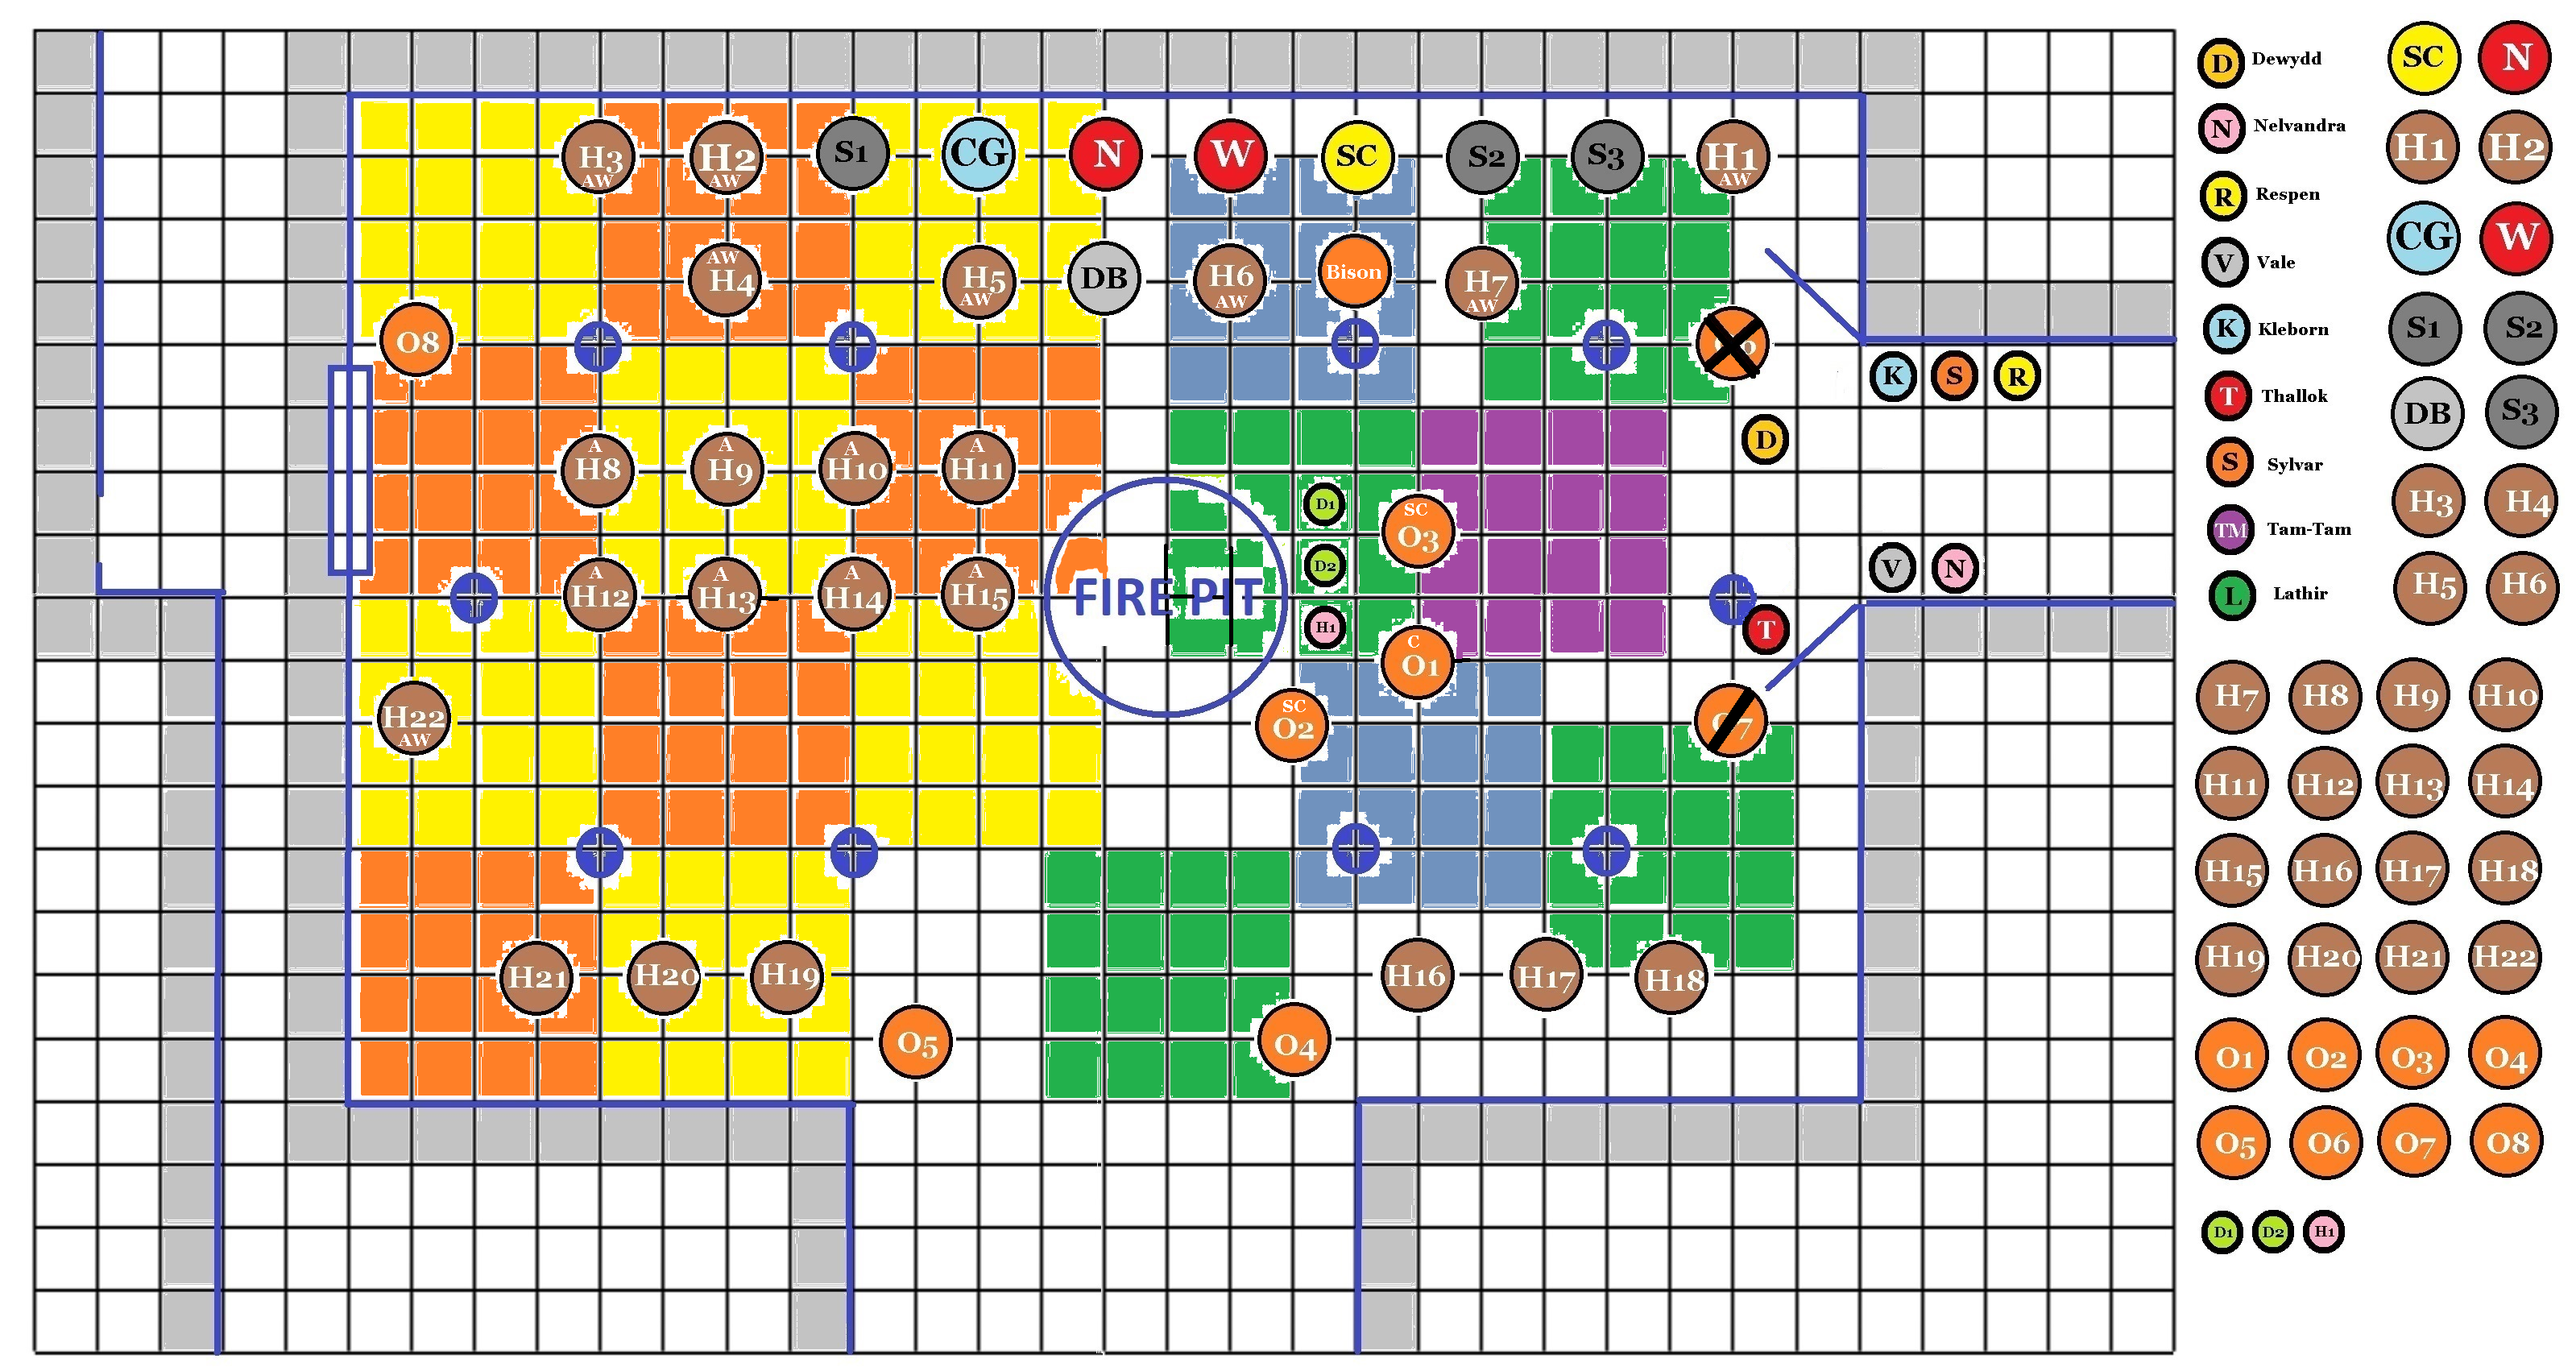 00-Big-Battle-Map-Giant-Great-Hall-001g3.png